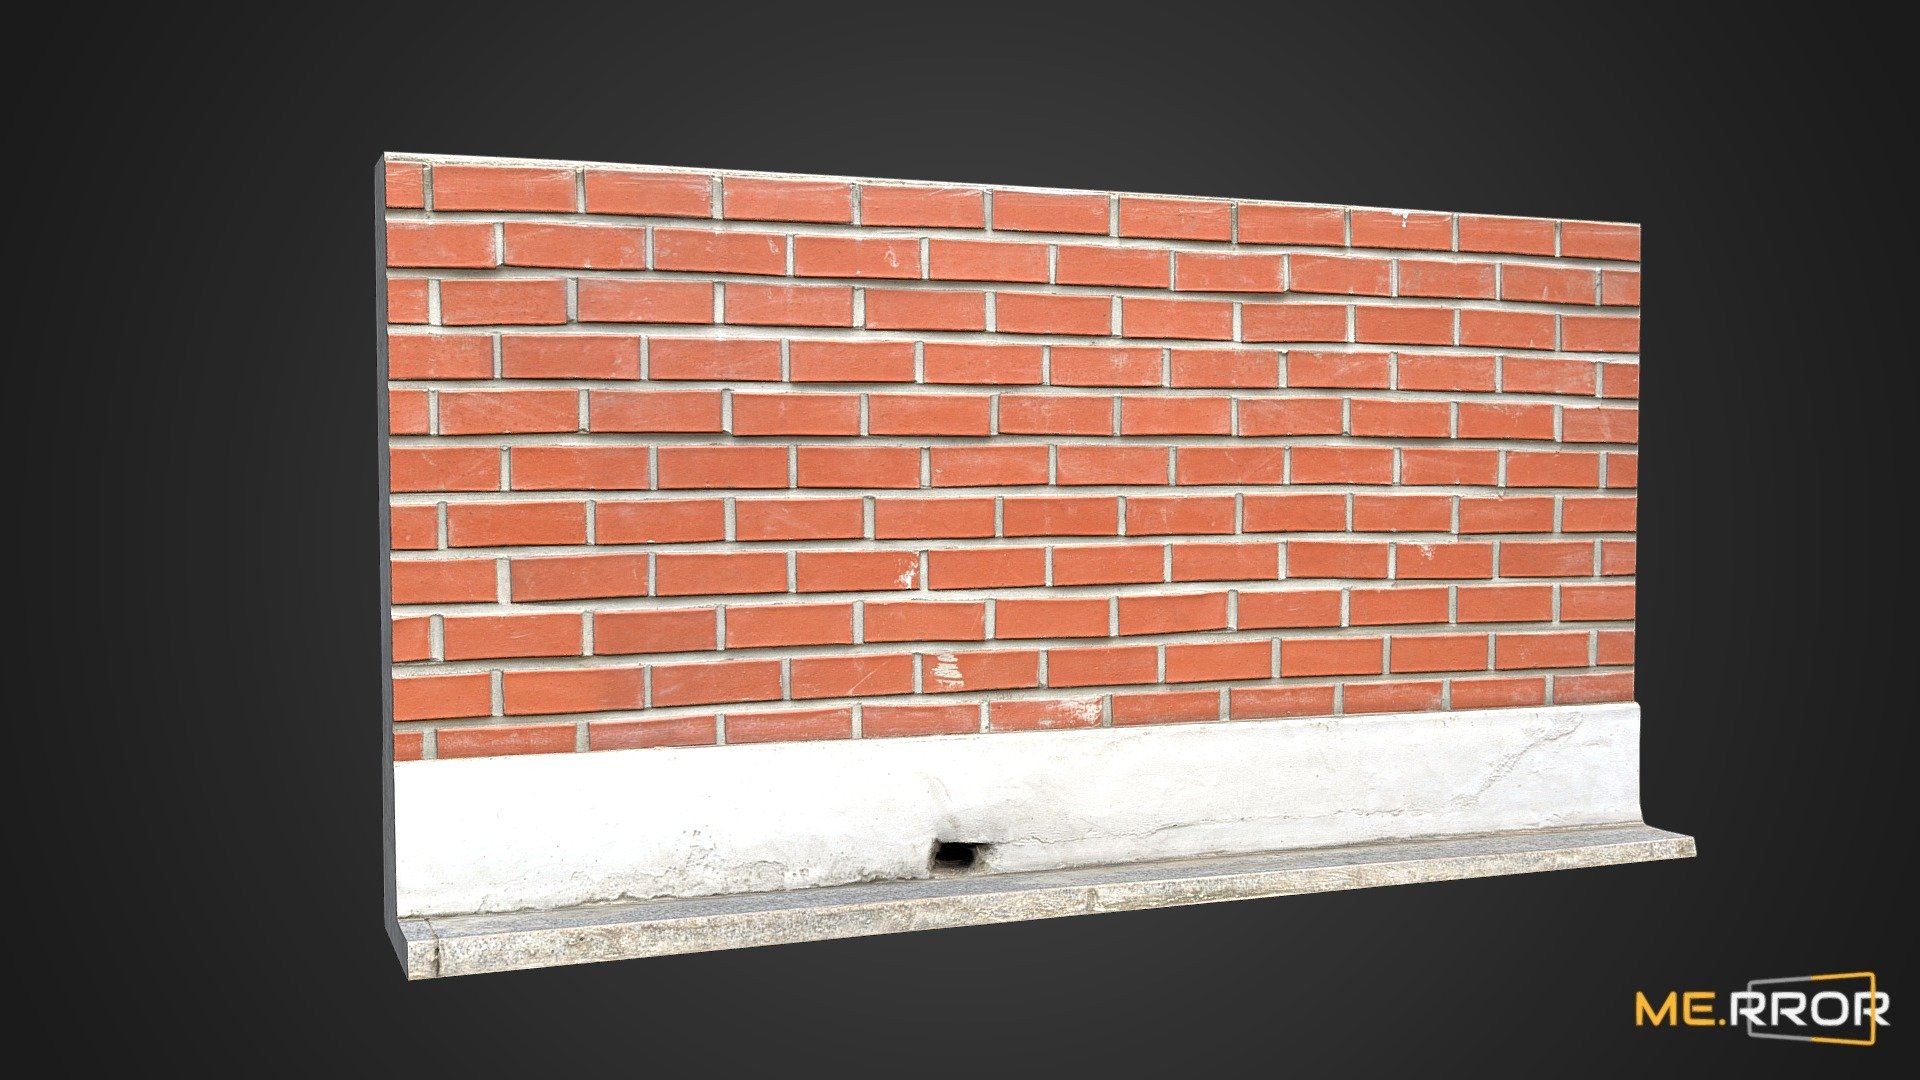 MERROR is a 3D Content PLATFORM which introduces various Asian assets to the 3D world


3DScanning #Photogrametry #ME.RROR - [Game-Ready] Brick Wall - Buy Royalty Free 3D model by ME.RROR (@merror) 3d model